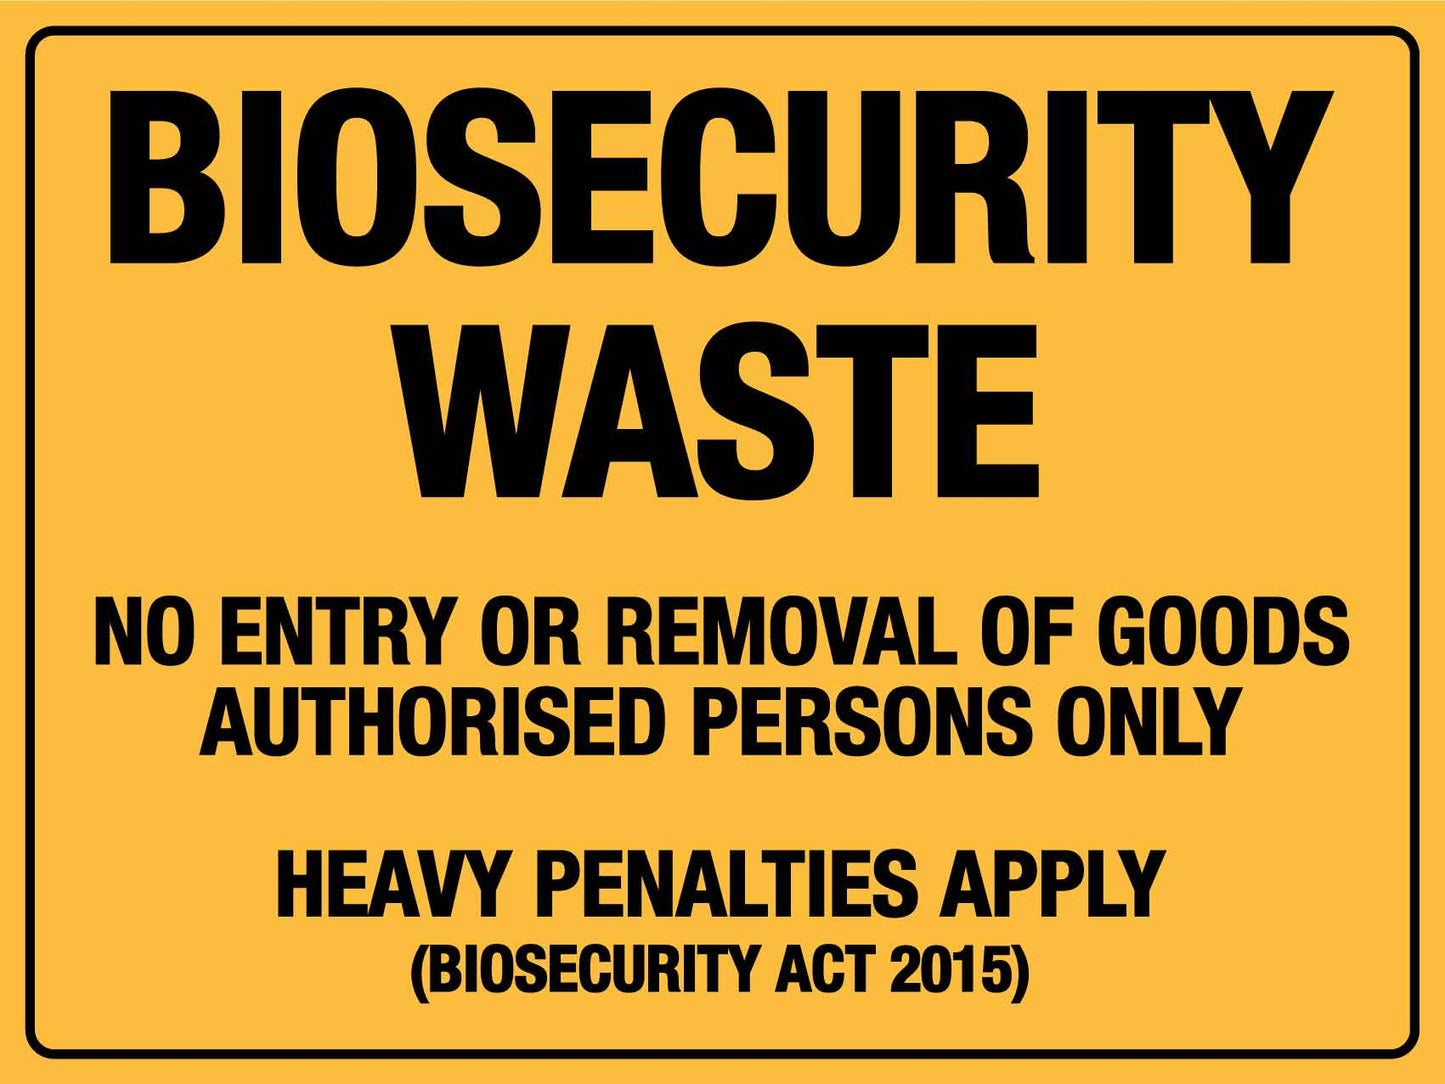 Biosecurity Waste No Entry or Removal of Goods Authorised Persons Only Sign